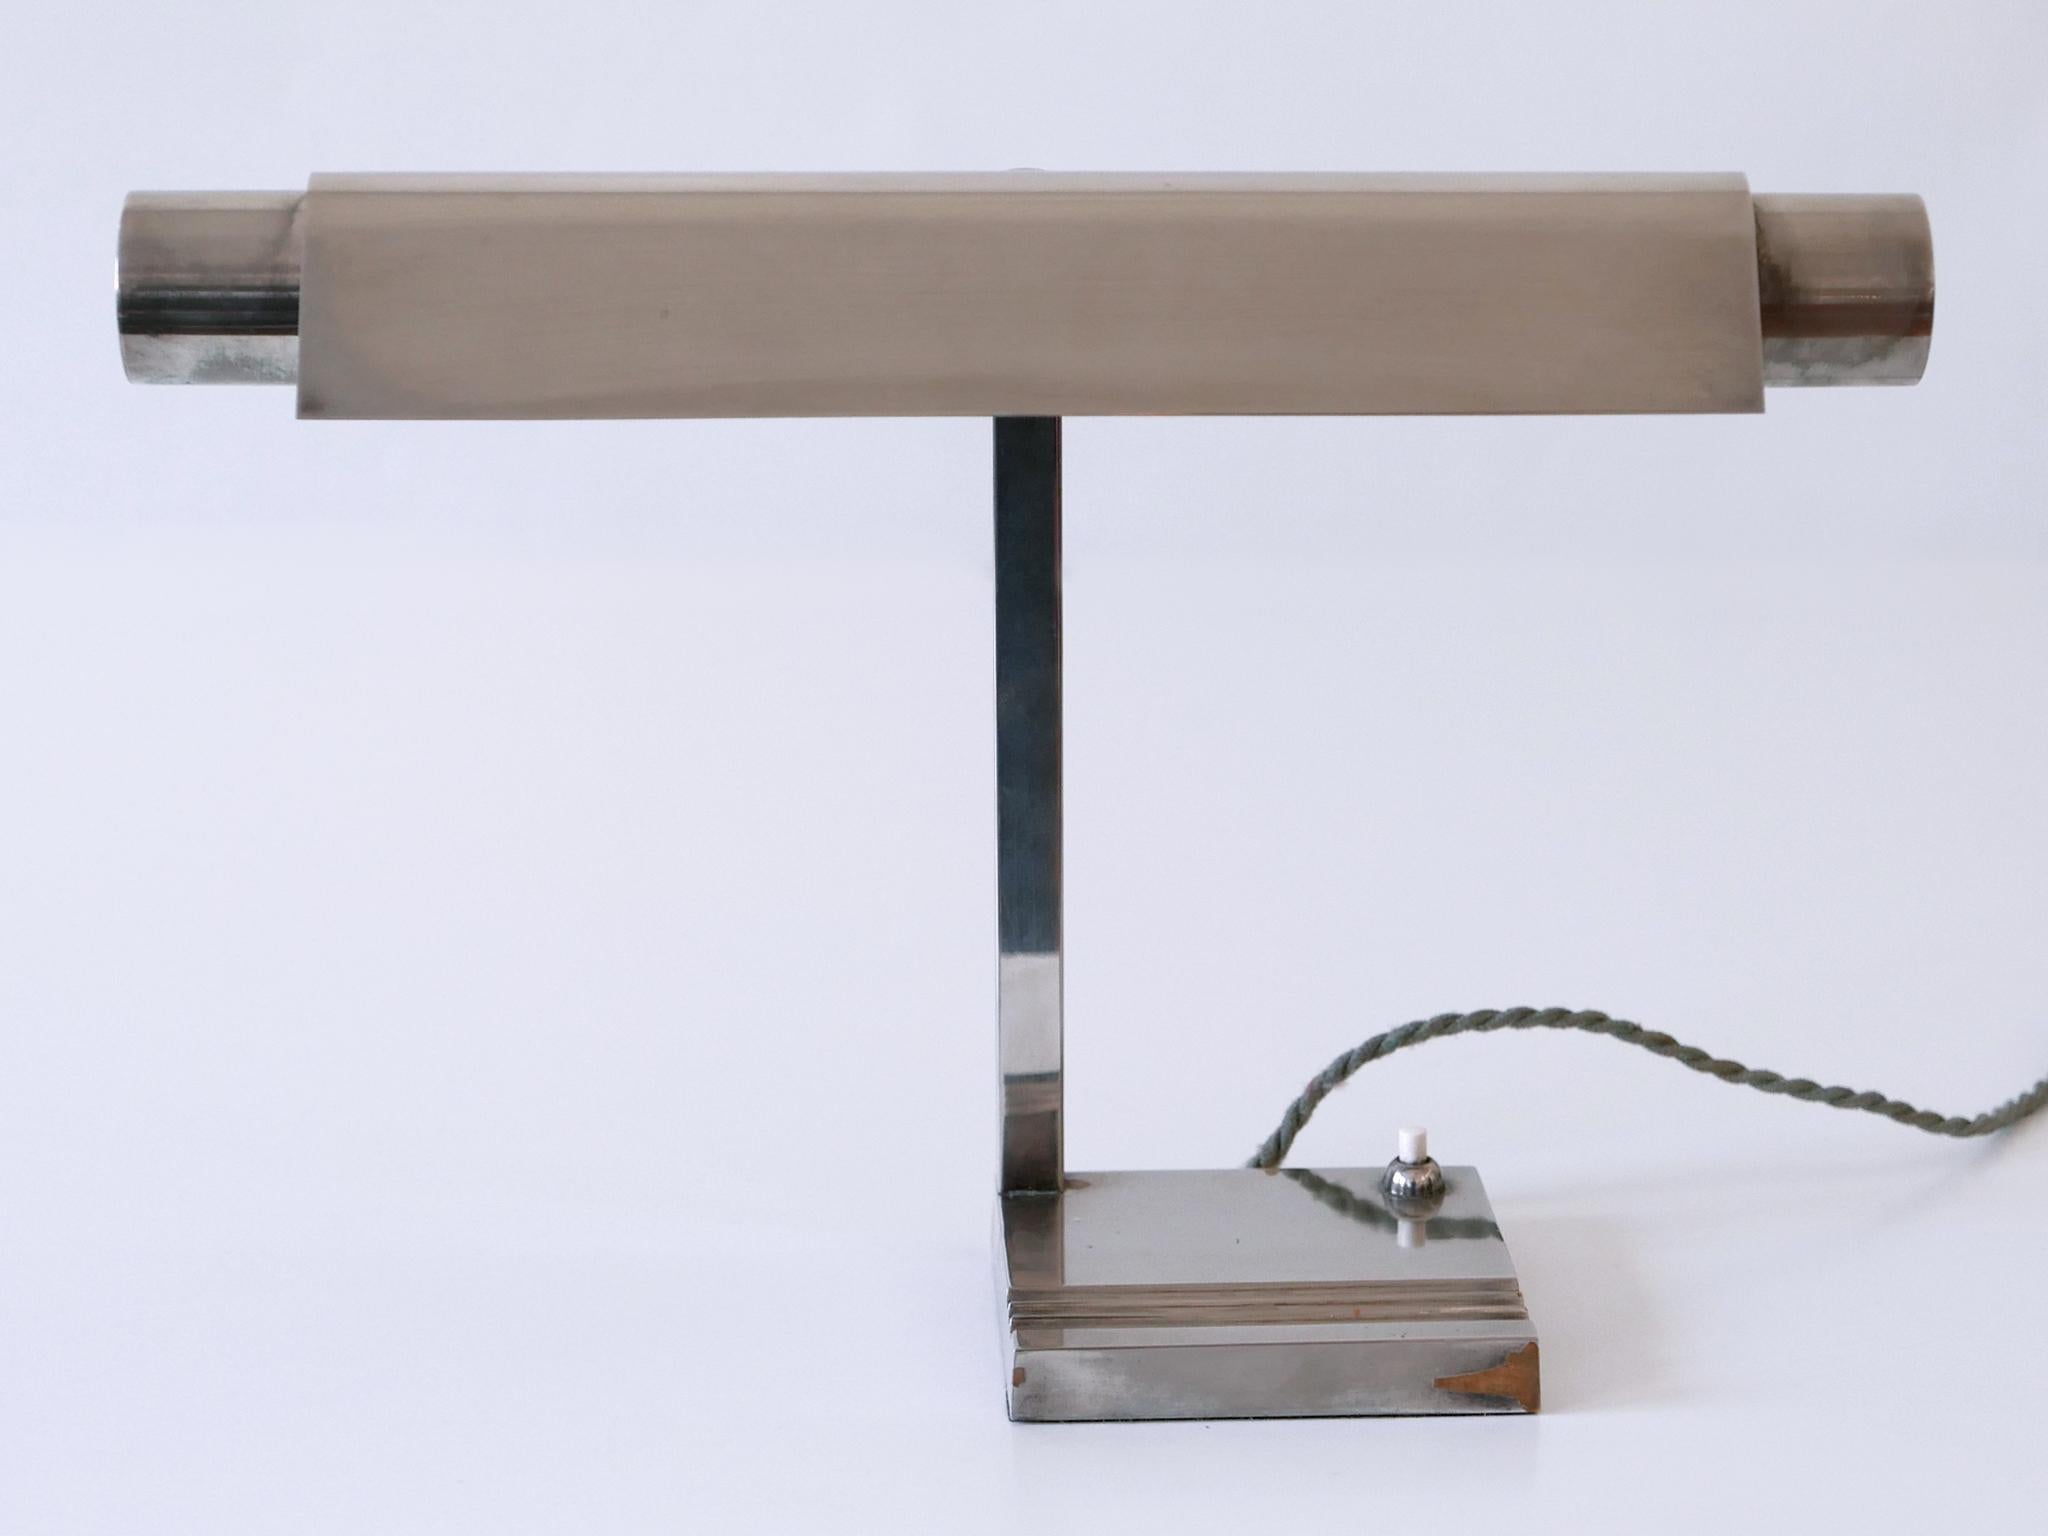 Extremely rare, minimalistic Modernist Neolux table lamp or desk light with adjustable shade. Designed and manufactured by Louis Dernier & Hamlyn Limited, England, 1930s.

Executed in nickel-plated brass, the table lamp needs 1 x Soffitte bulb, is